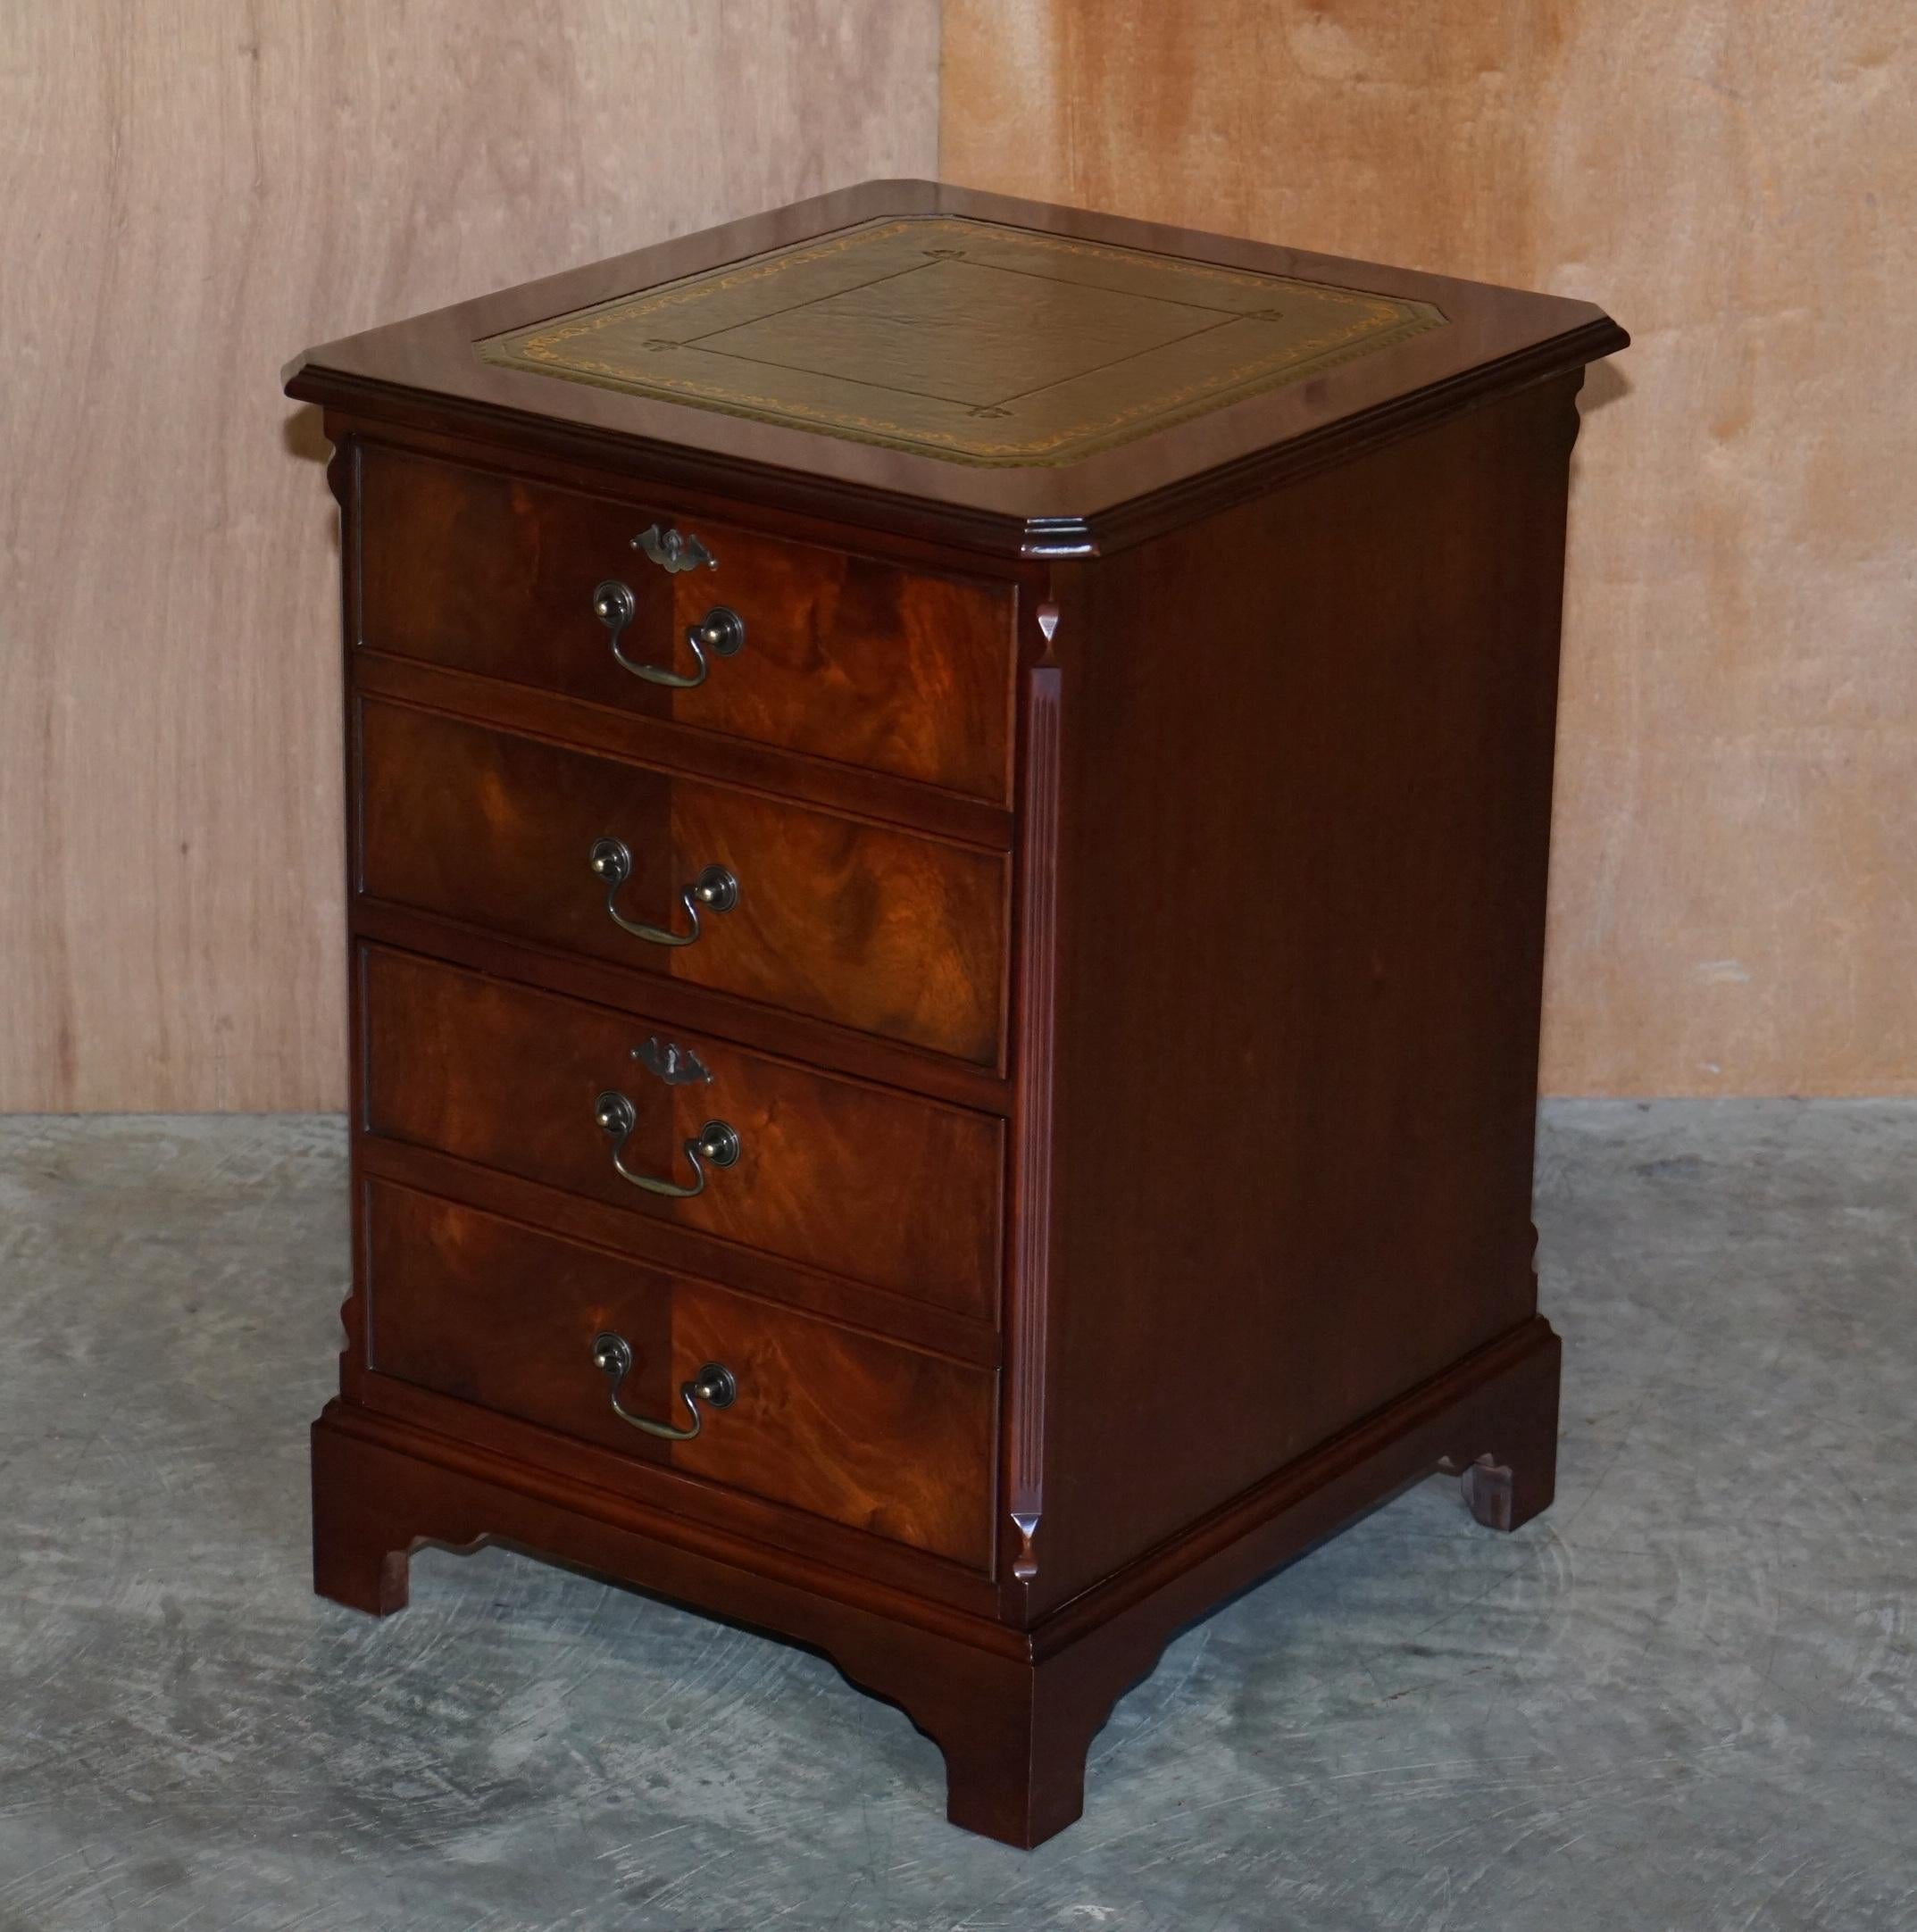 We are delighted to offer this exquisite twin drawer flamed mahogany, green leather topped filing cabinet

A good looking and well made piece, ideally suited for an office or library setting but can of course be used for a living room pedestal